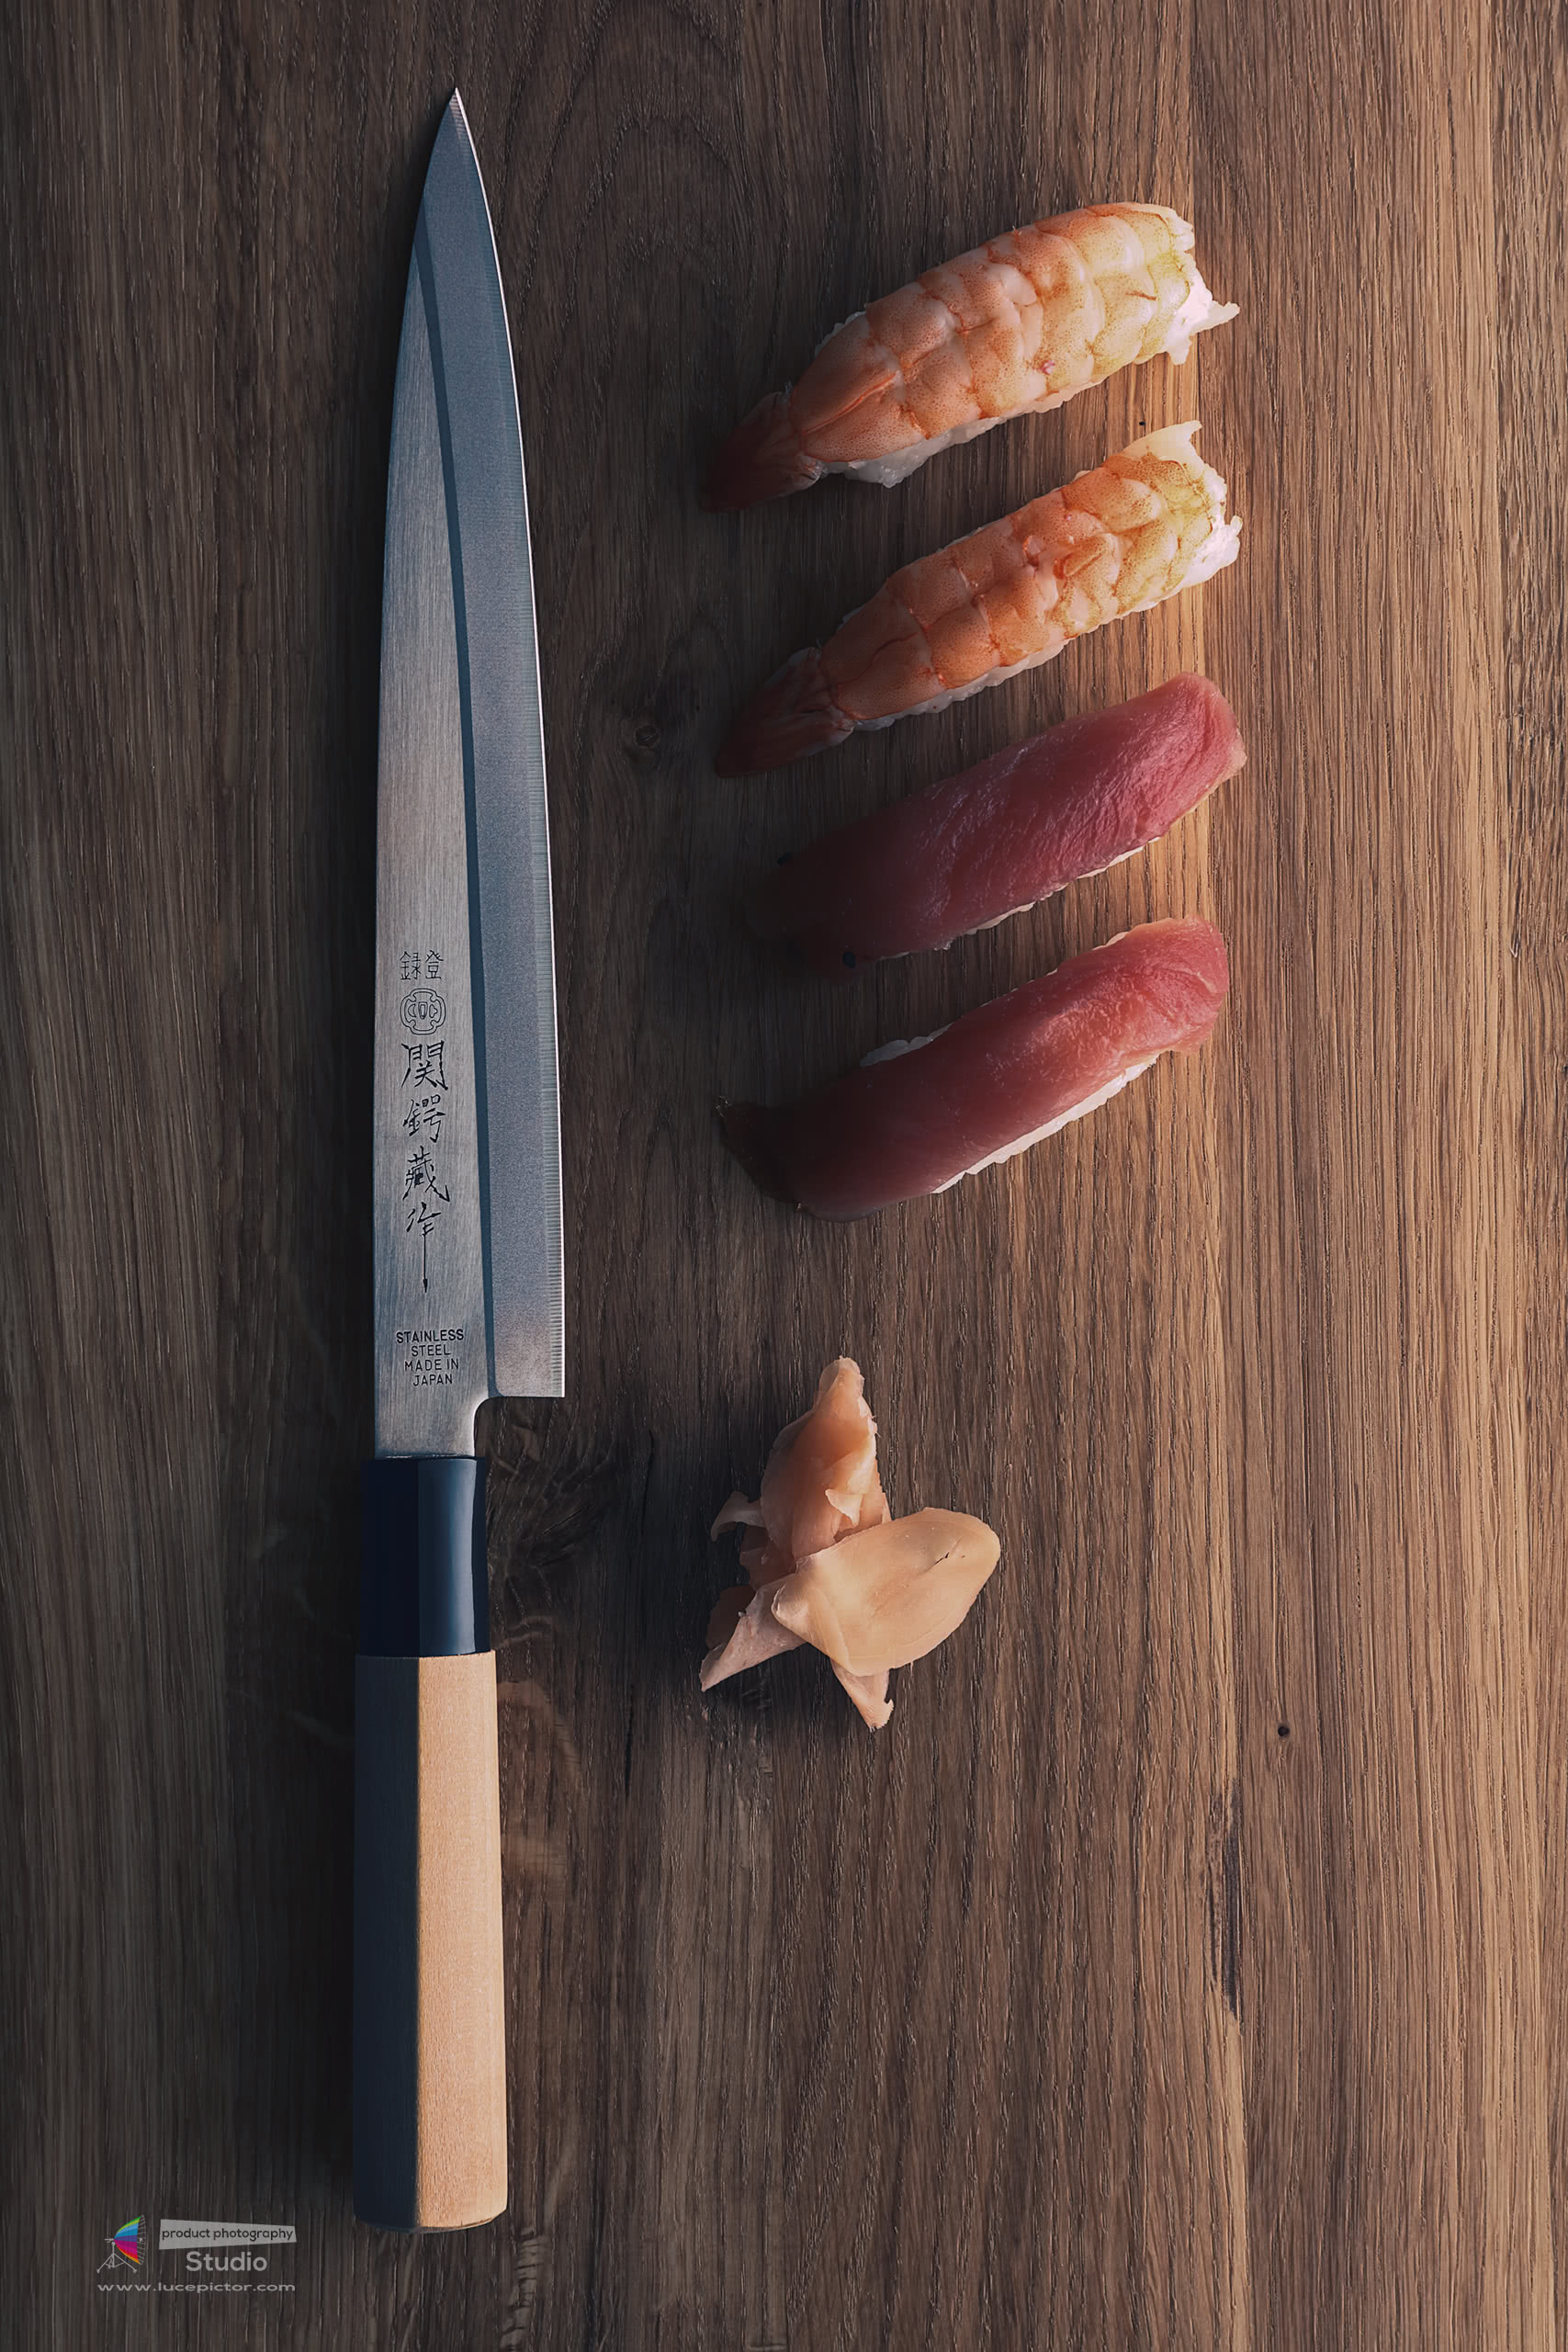 editorial knife product photography